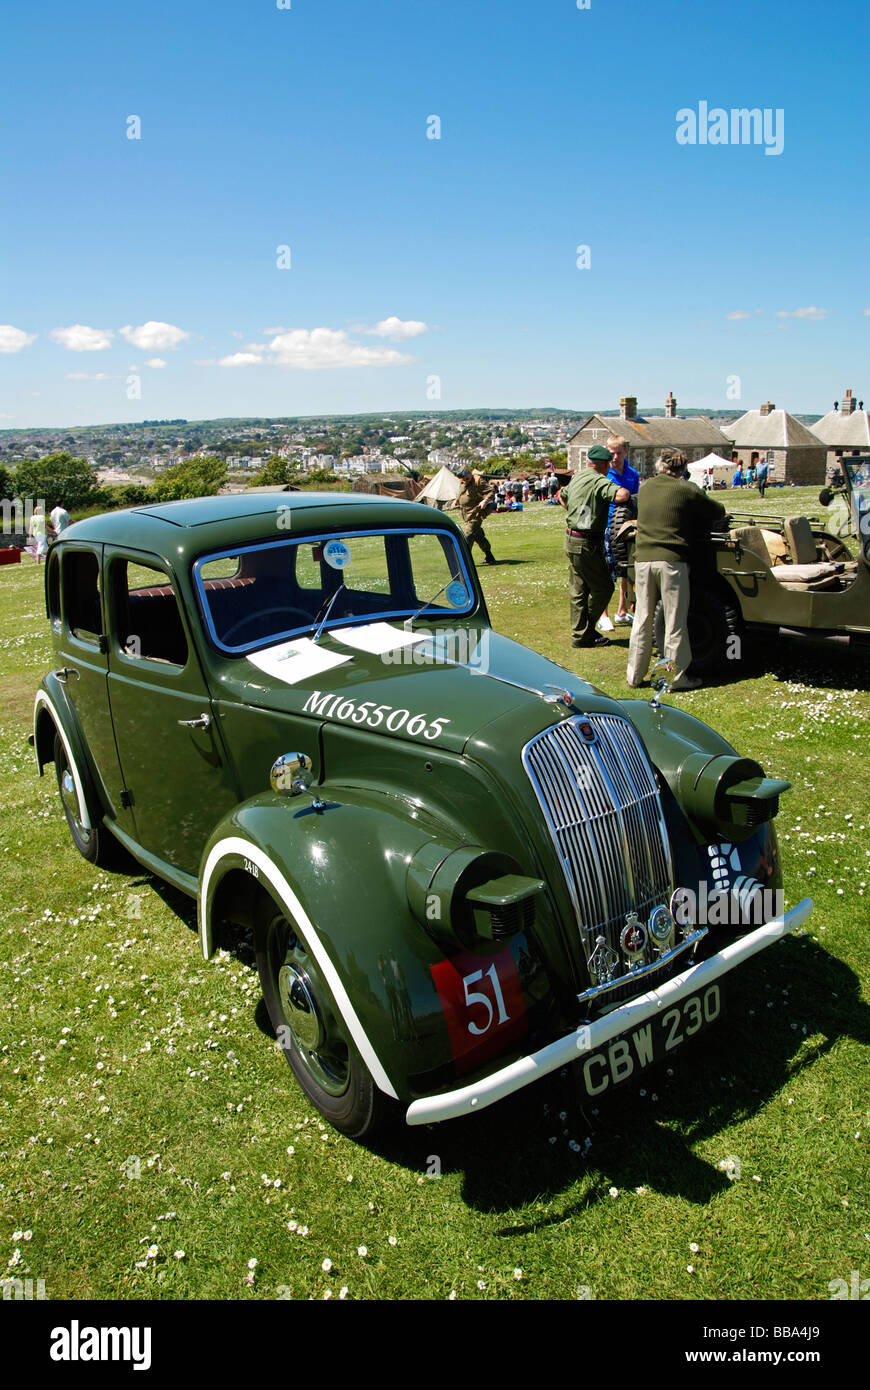 a morris 8 car used as a staff vehicle during the second world war, at a d. day remembrance day in falmouth,cornwall,uk Stock Photo